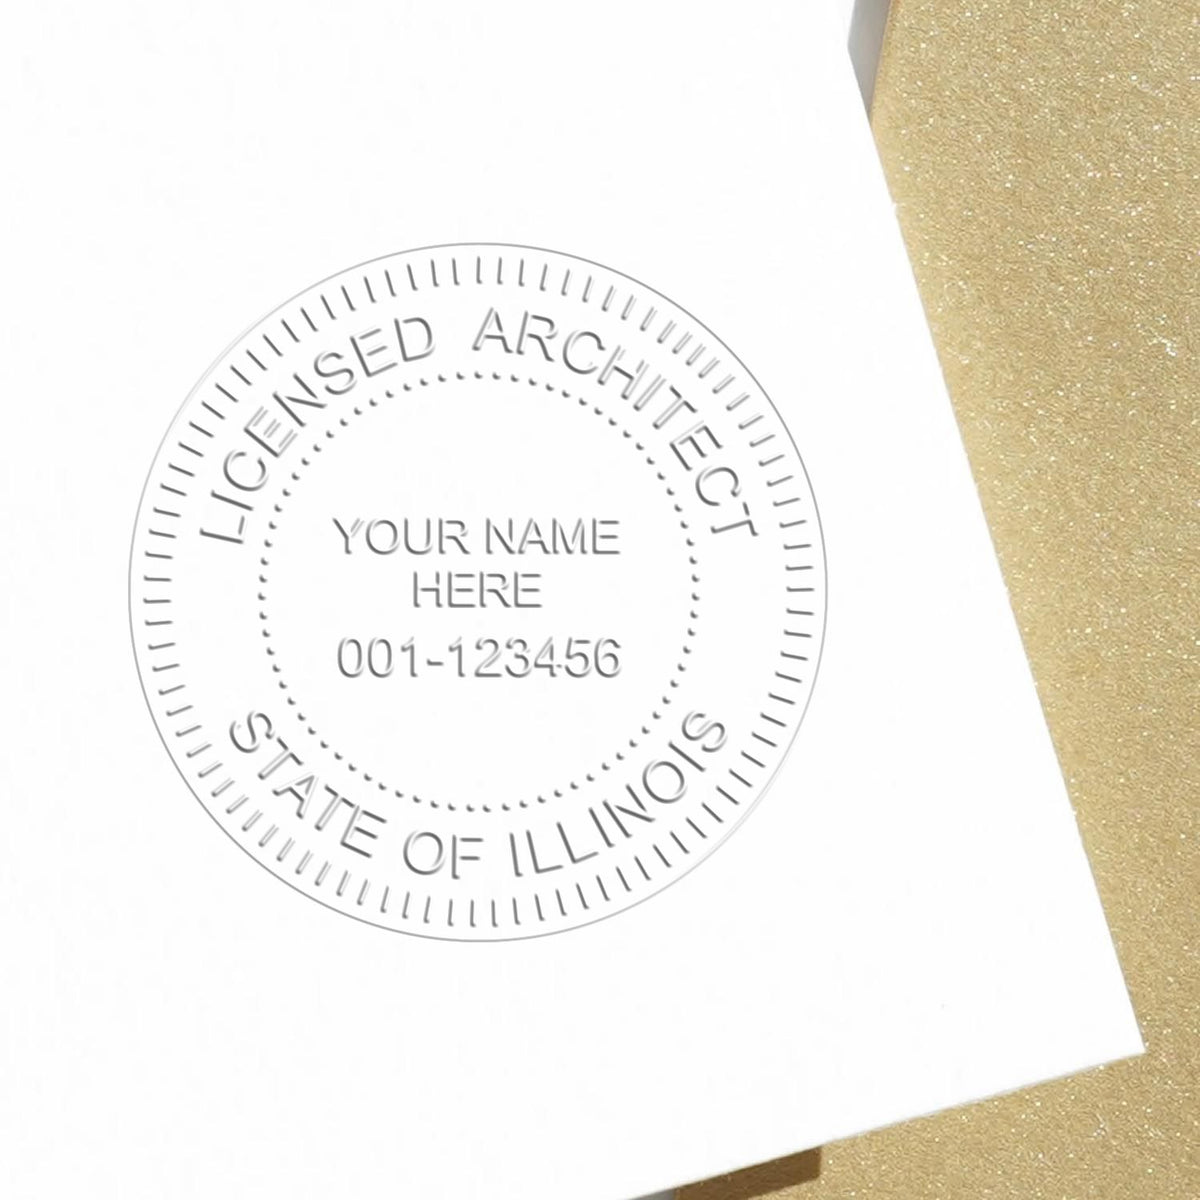 A stamped imprint of the Gift Illinois Architect Seal in this stylish lifestyle photo, setting the tone for a unique and personalized product.